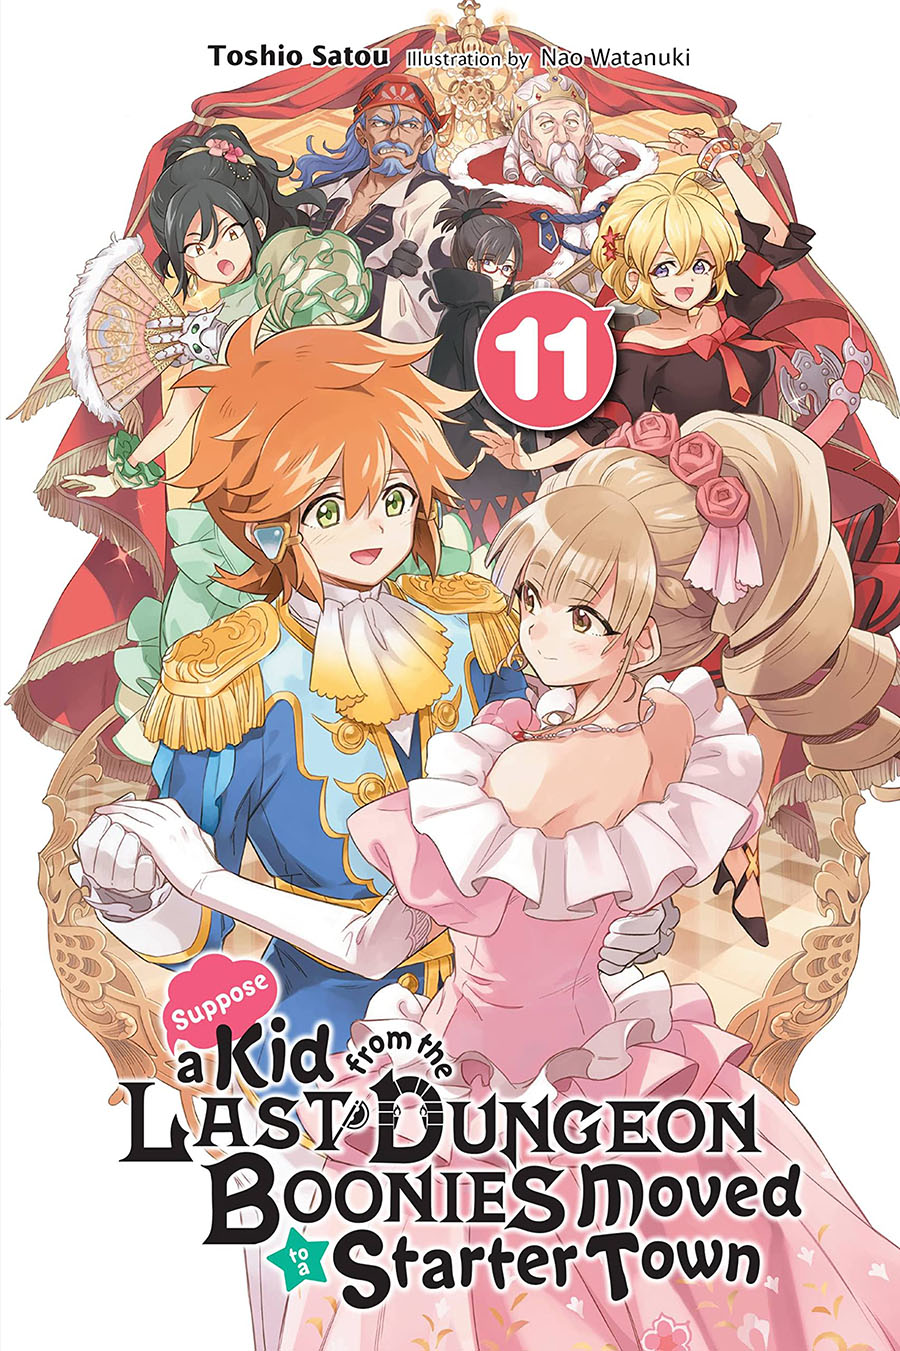 Suppose A Kid From The Last Dungeon Boonies Moved To A Starter Town Light Novel Vol 11